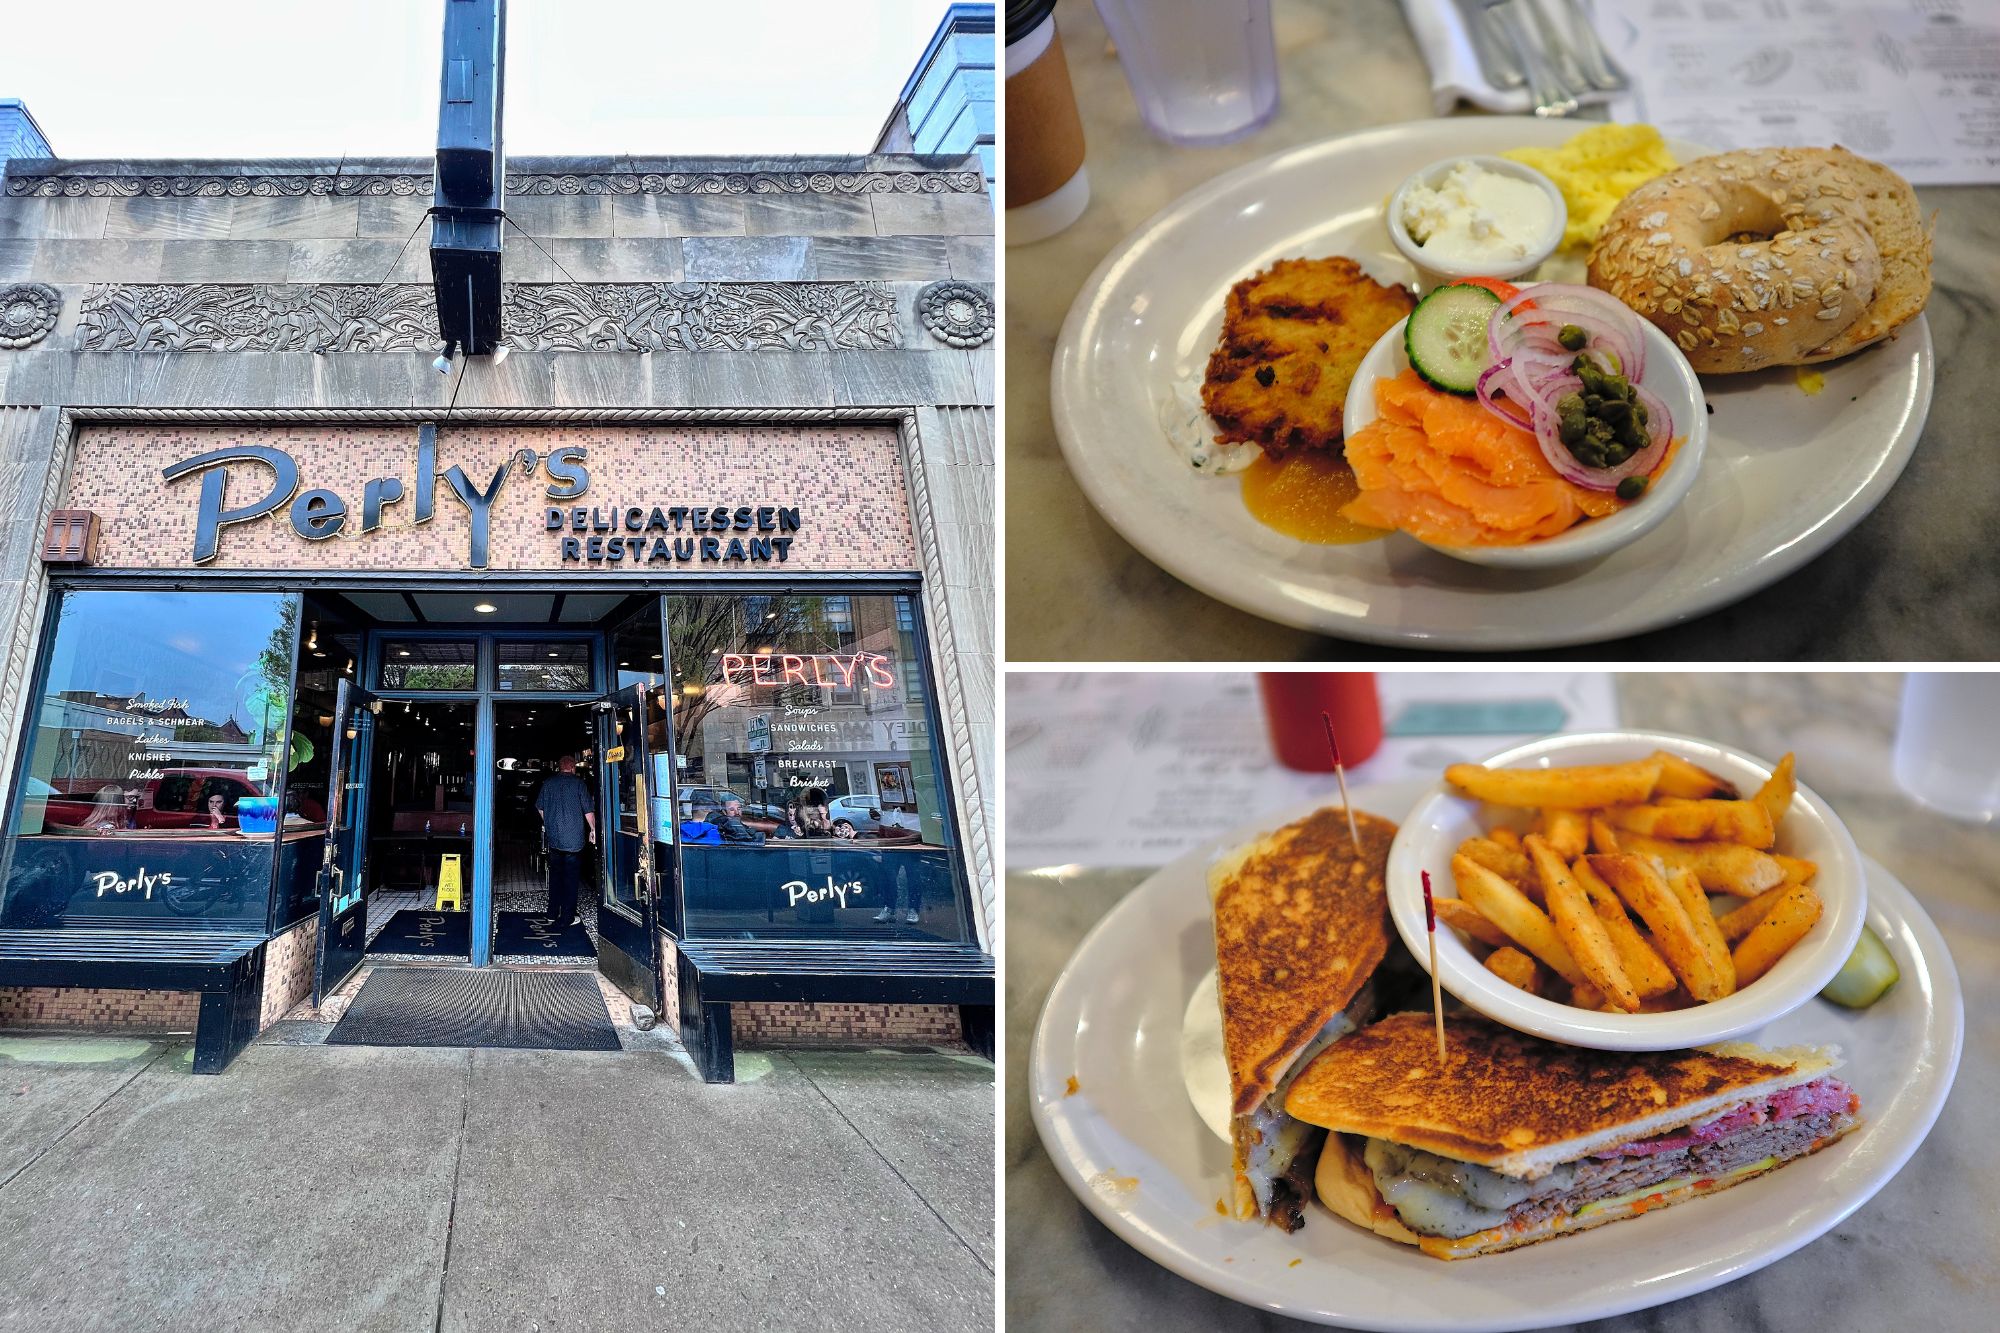 Collage of the entrance to Perly's and two items on the menu